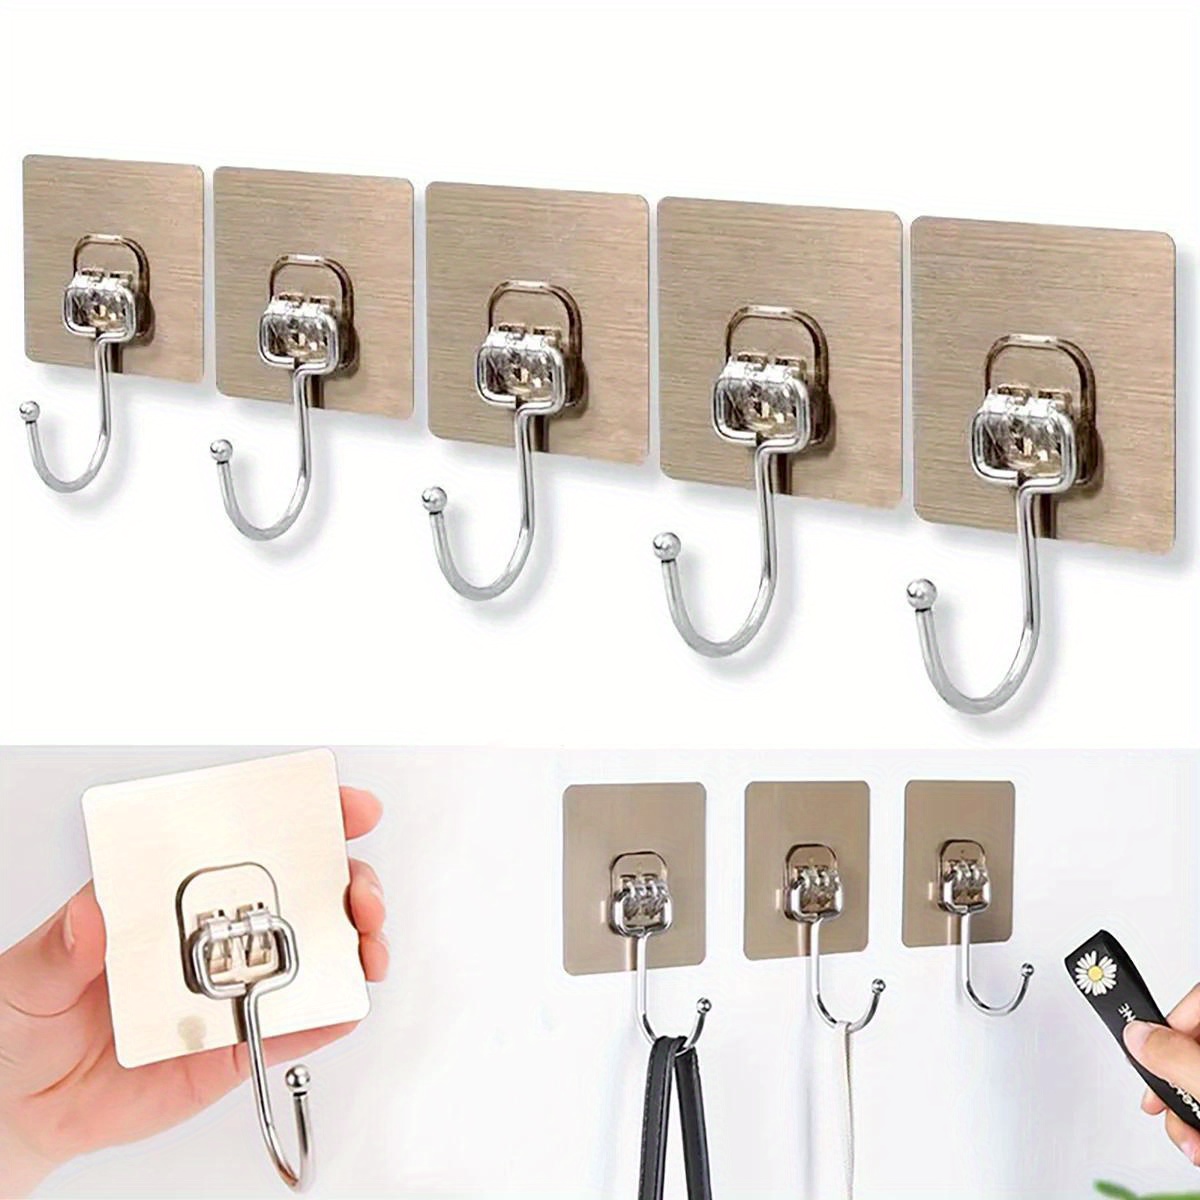 5Pcs Strong Self Adhesive Wall Hook Big Size Transparent Key Holder Wall  Hanger Hooks for Hanging